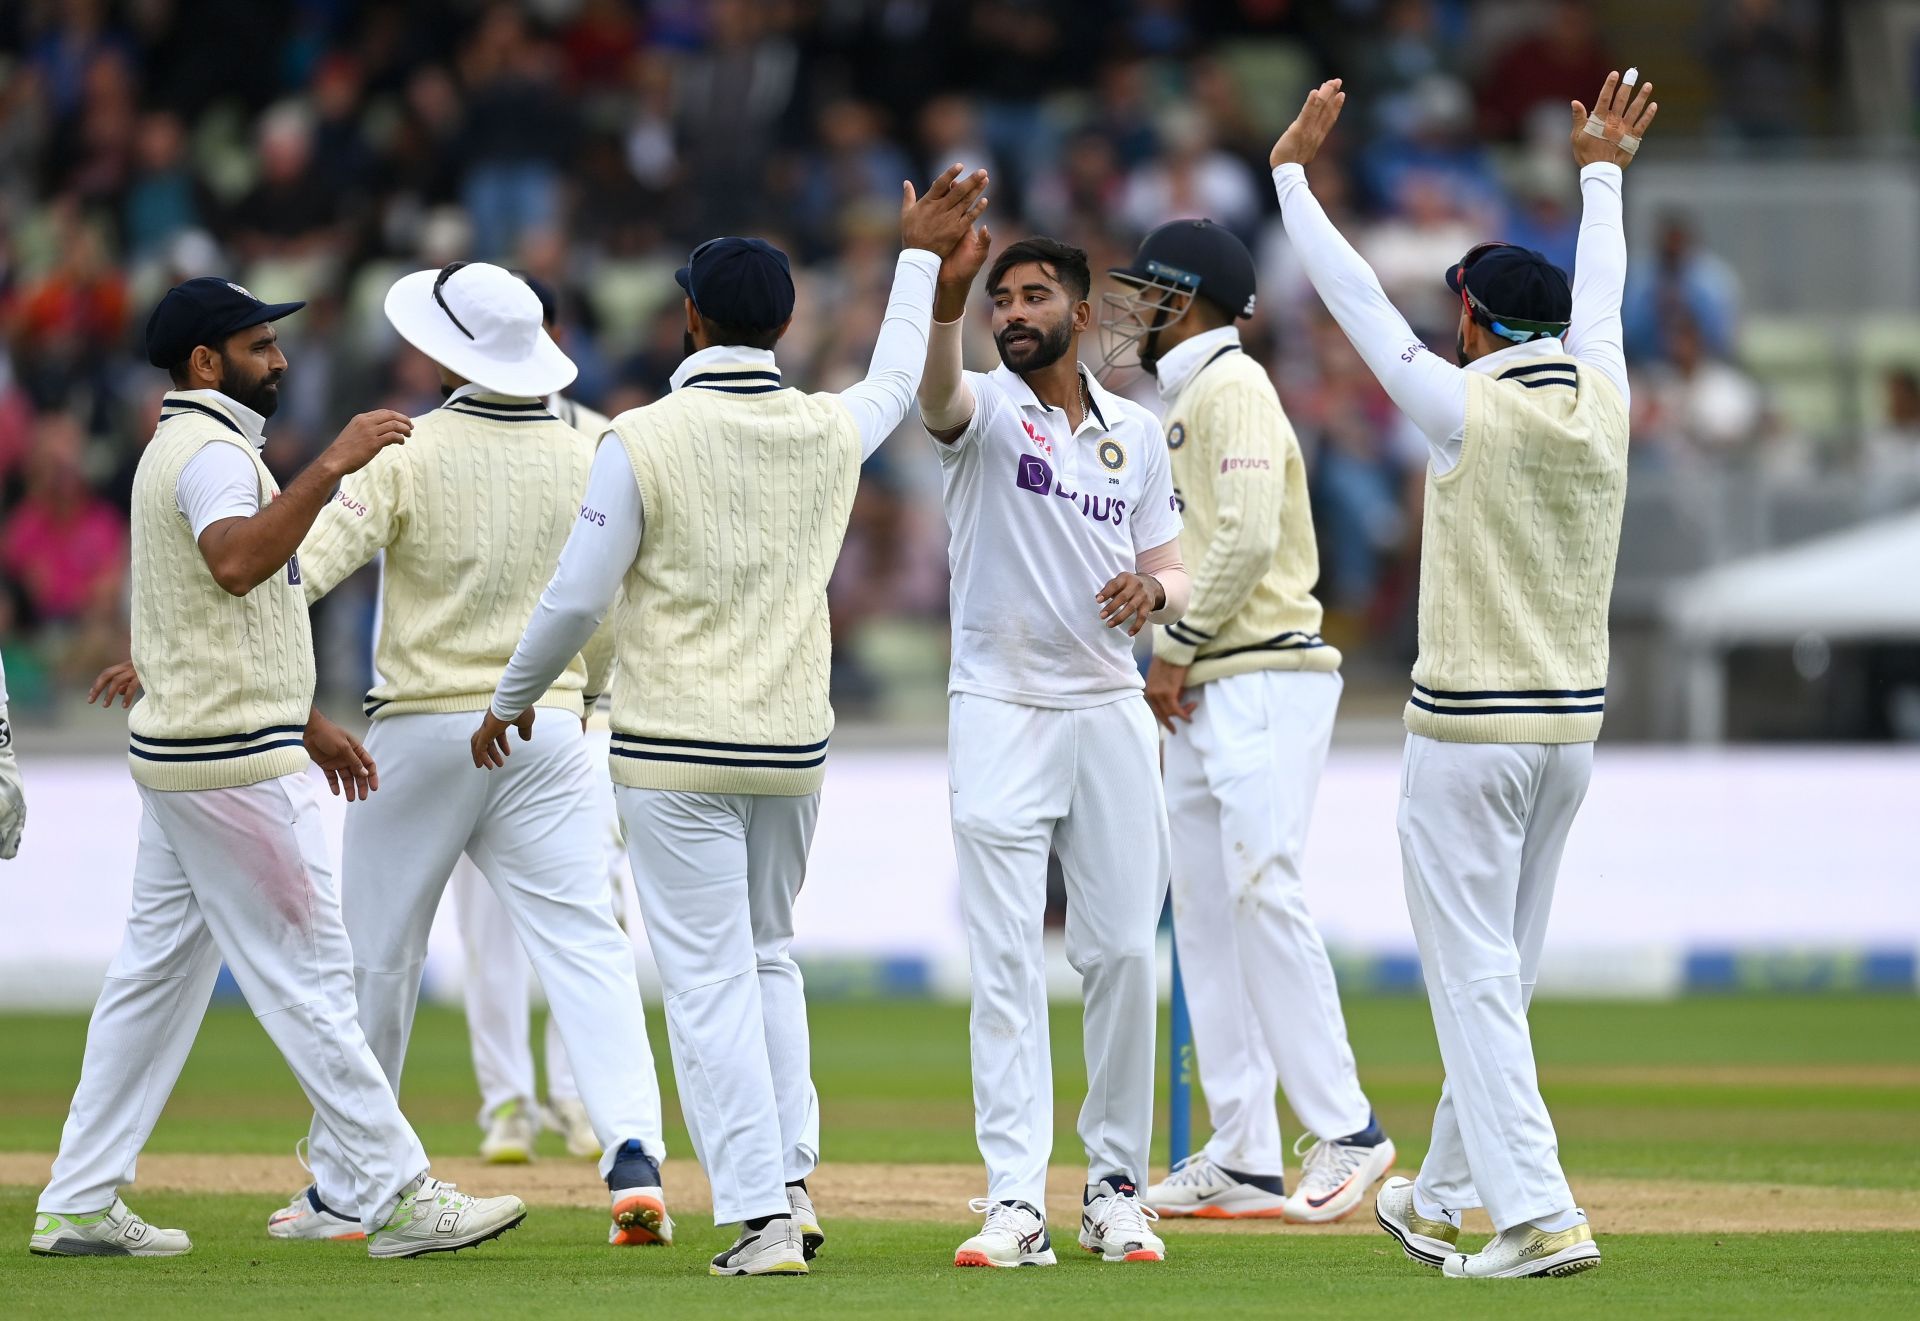 Mohammed Siraj celebrates dismissing Stuart Broad on Day 3 of the Birmingham Test. Pic: Getty Images